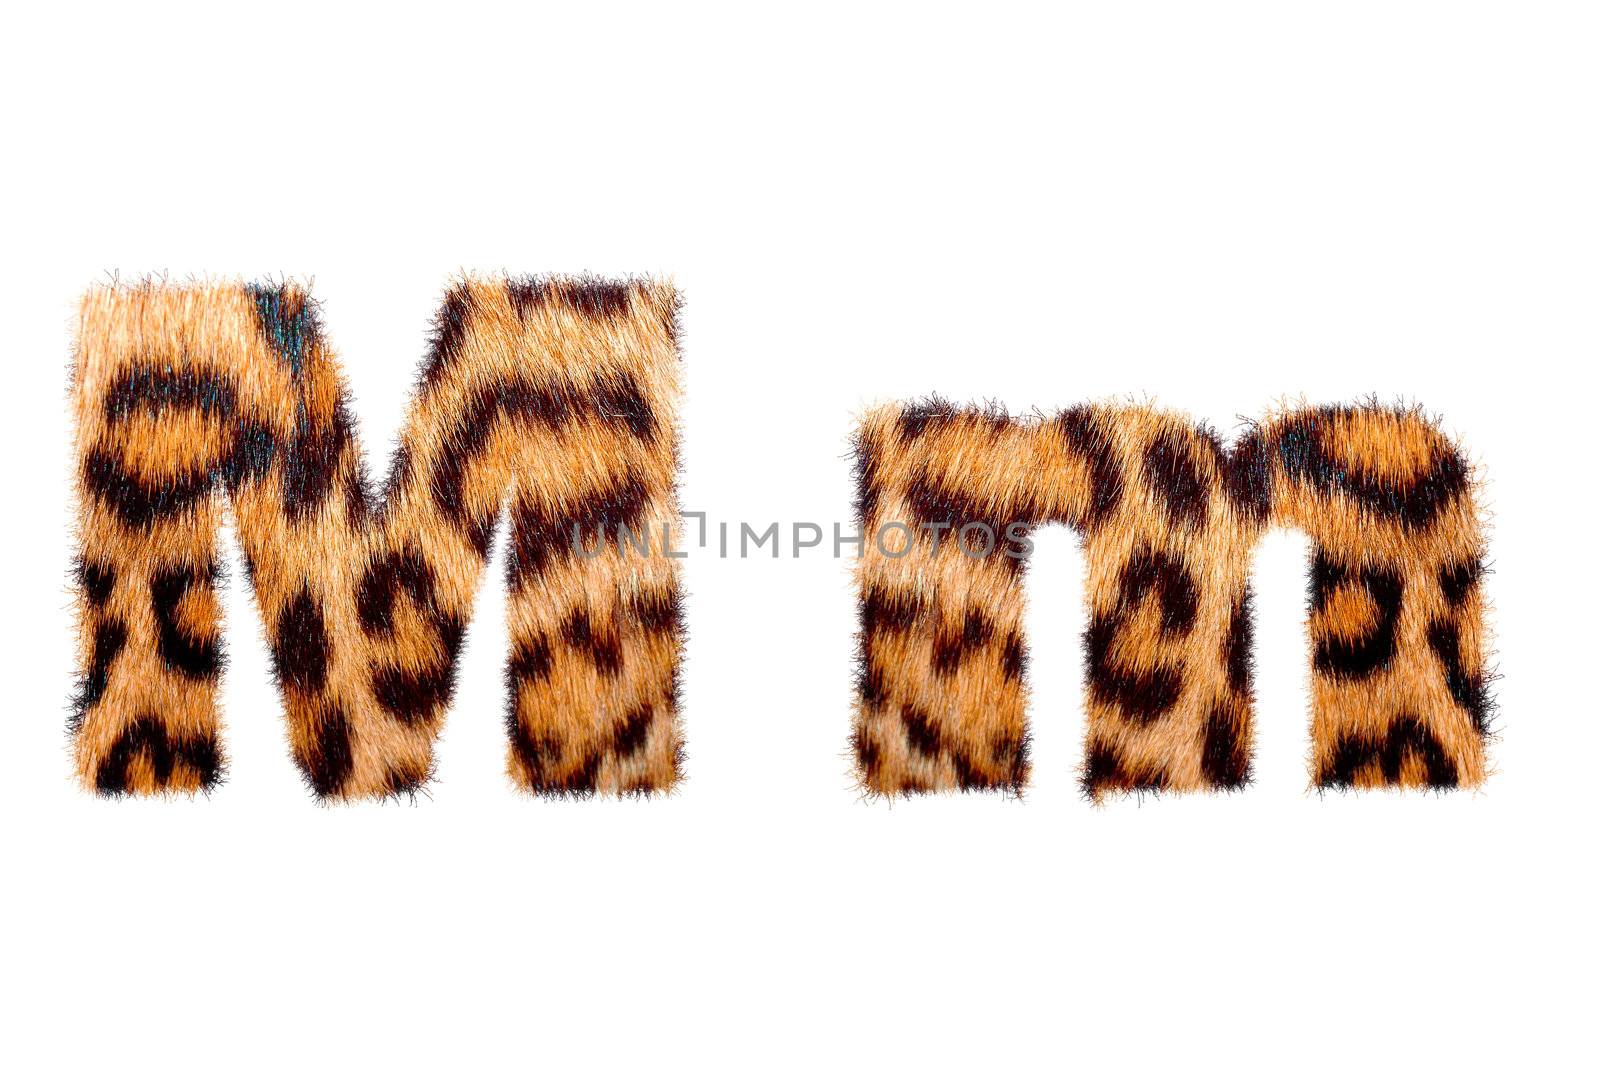 Custom english text base on leopard skin by sasilsolutions